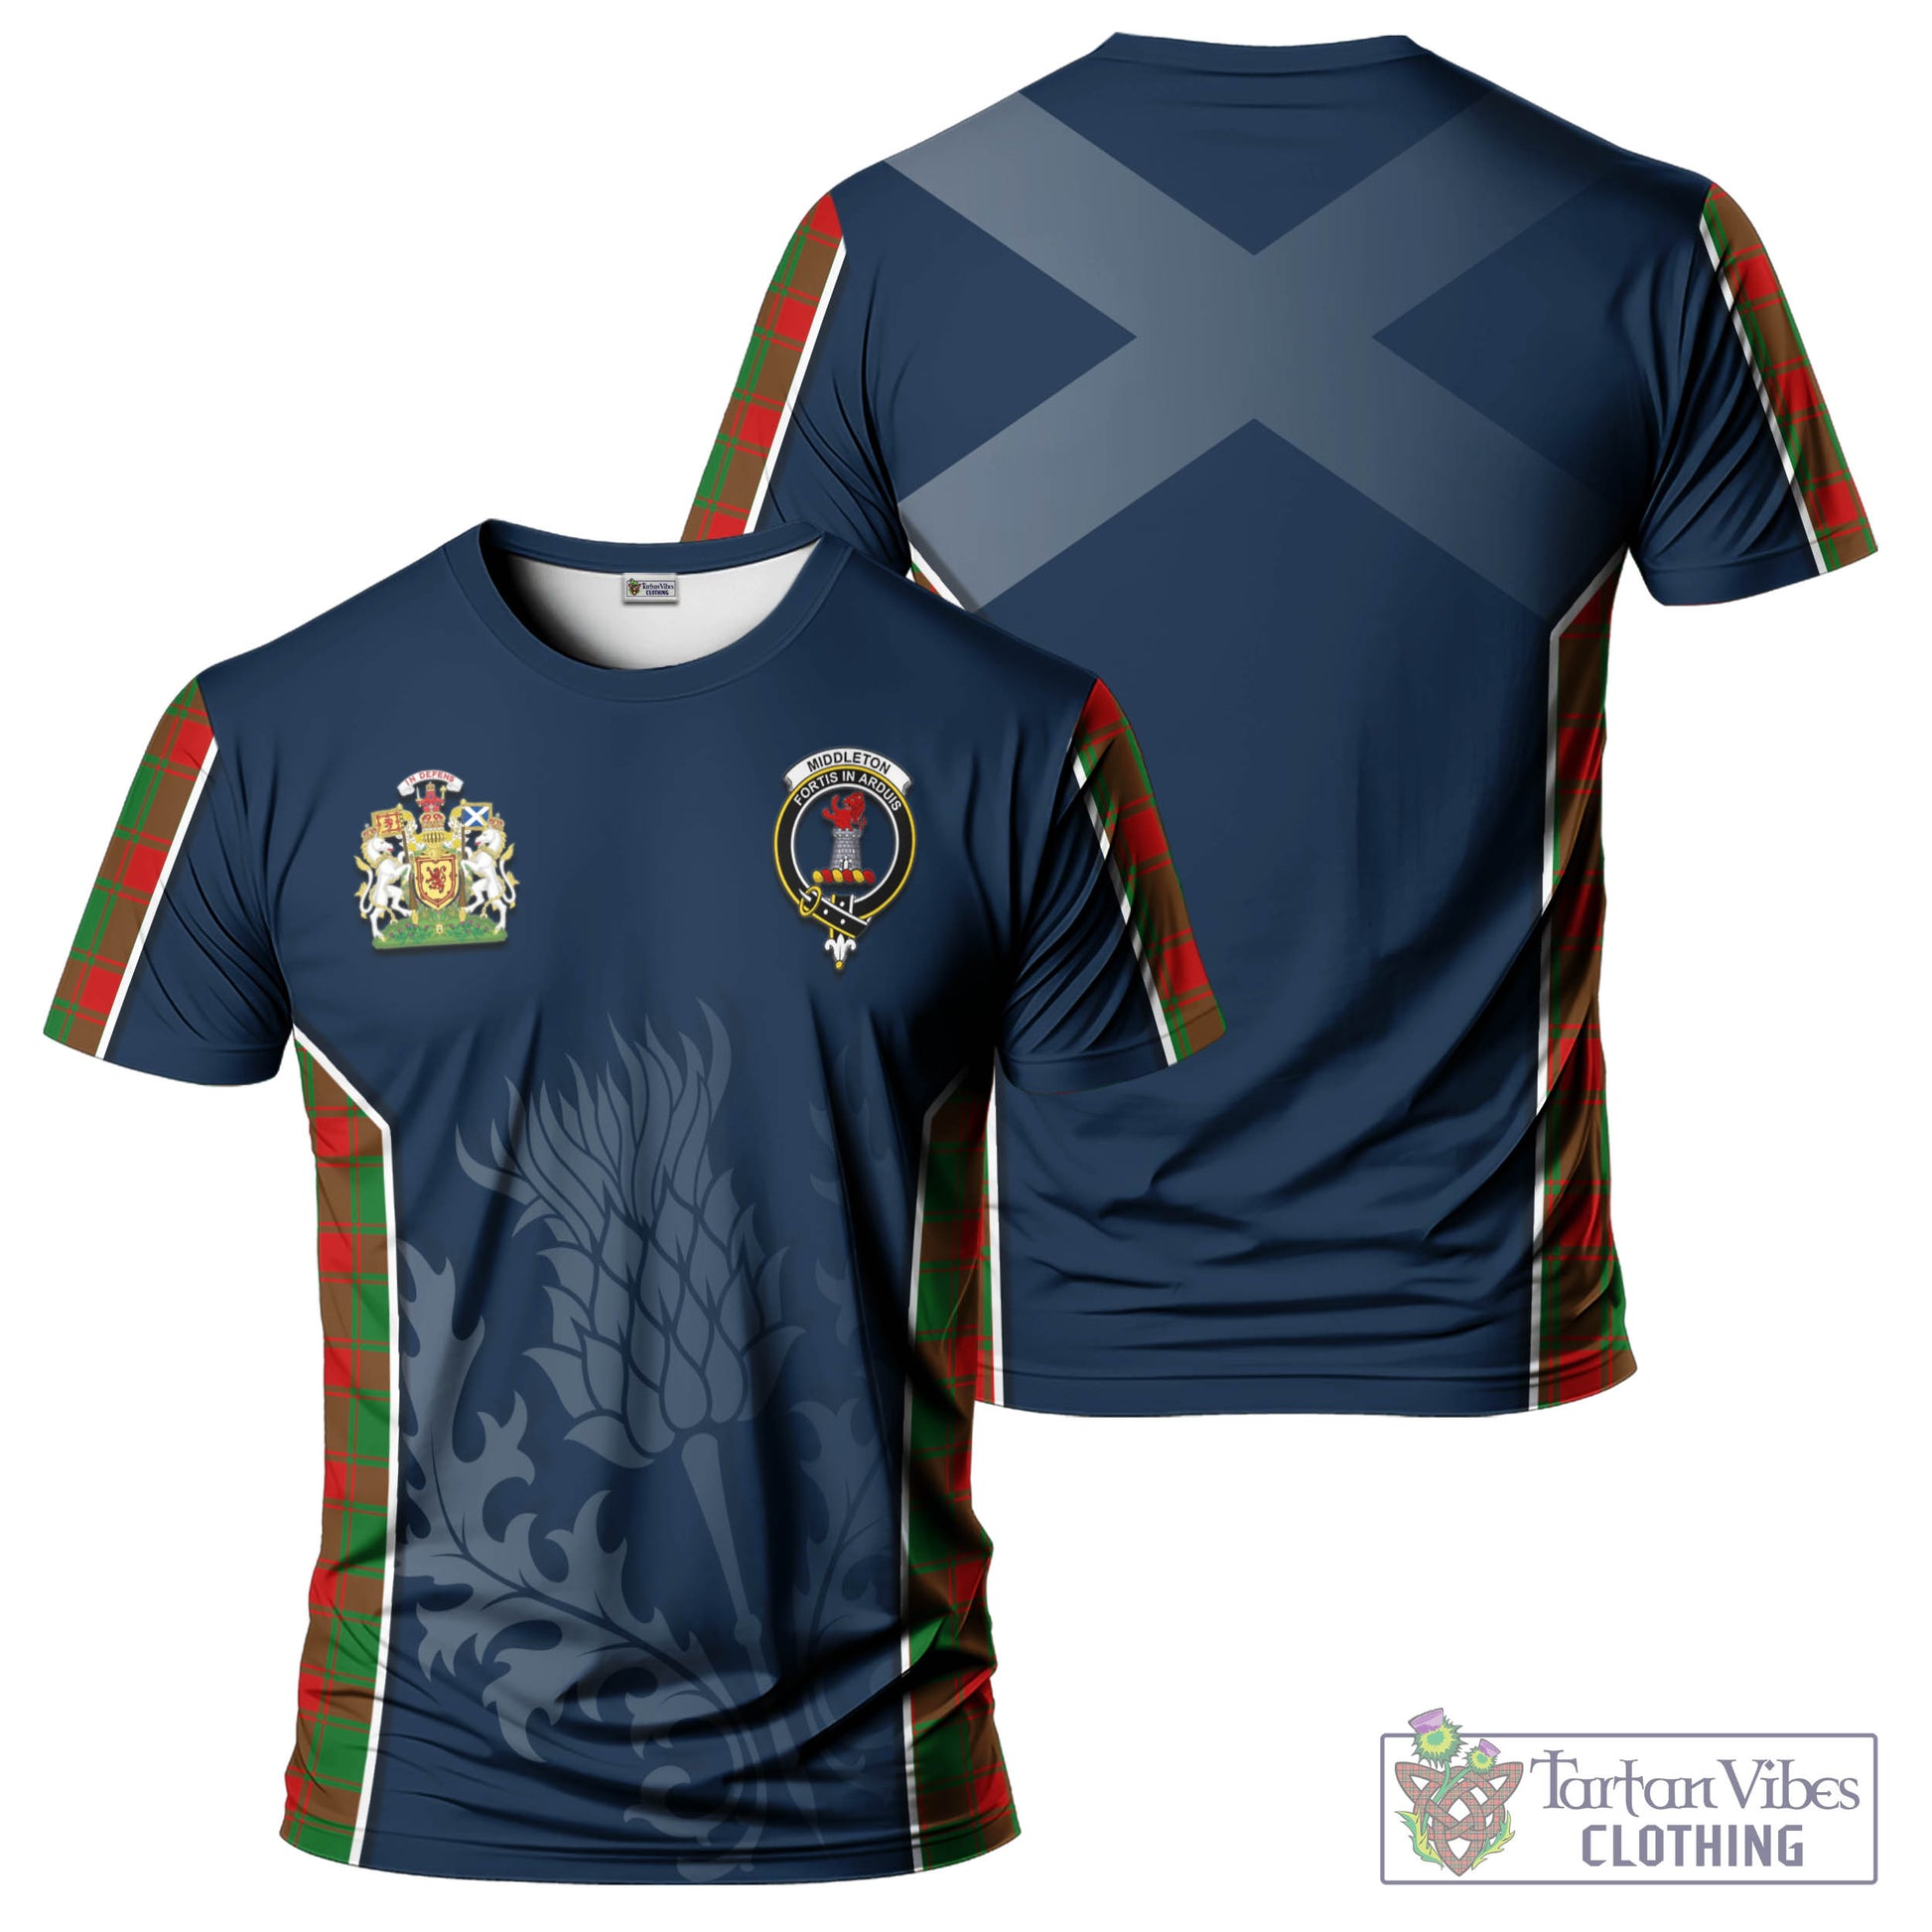 Tartan Vibes Clothing Middleton Modern Tartan T-Shirt with Family Crest and Scottish Thistle Vibes Sport Style